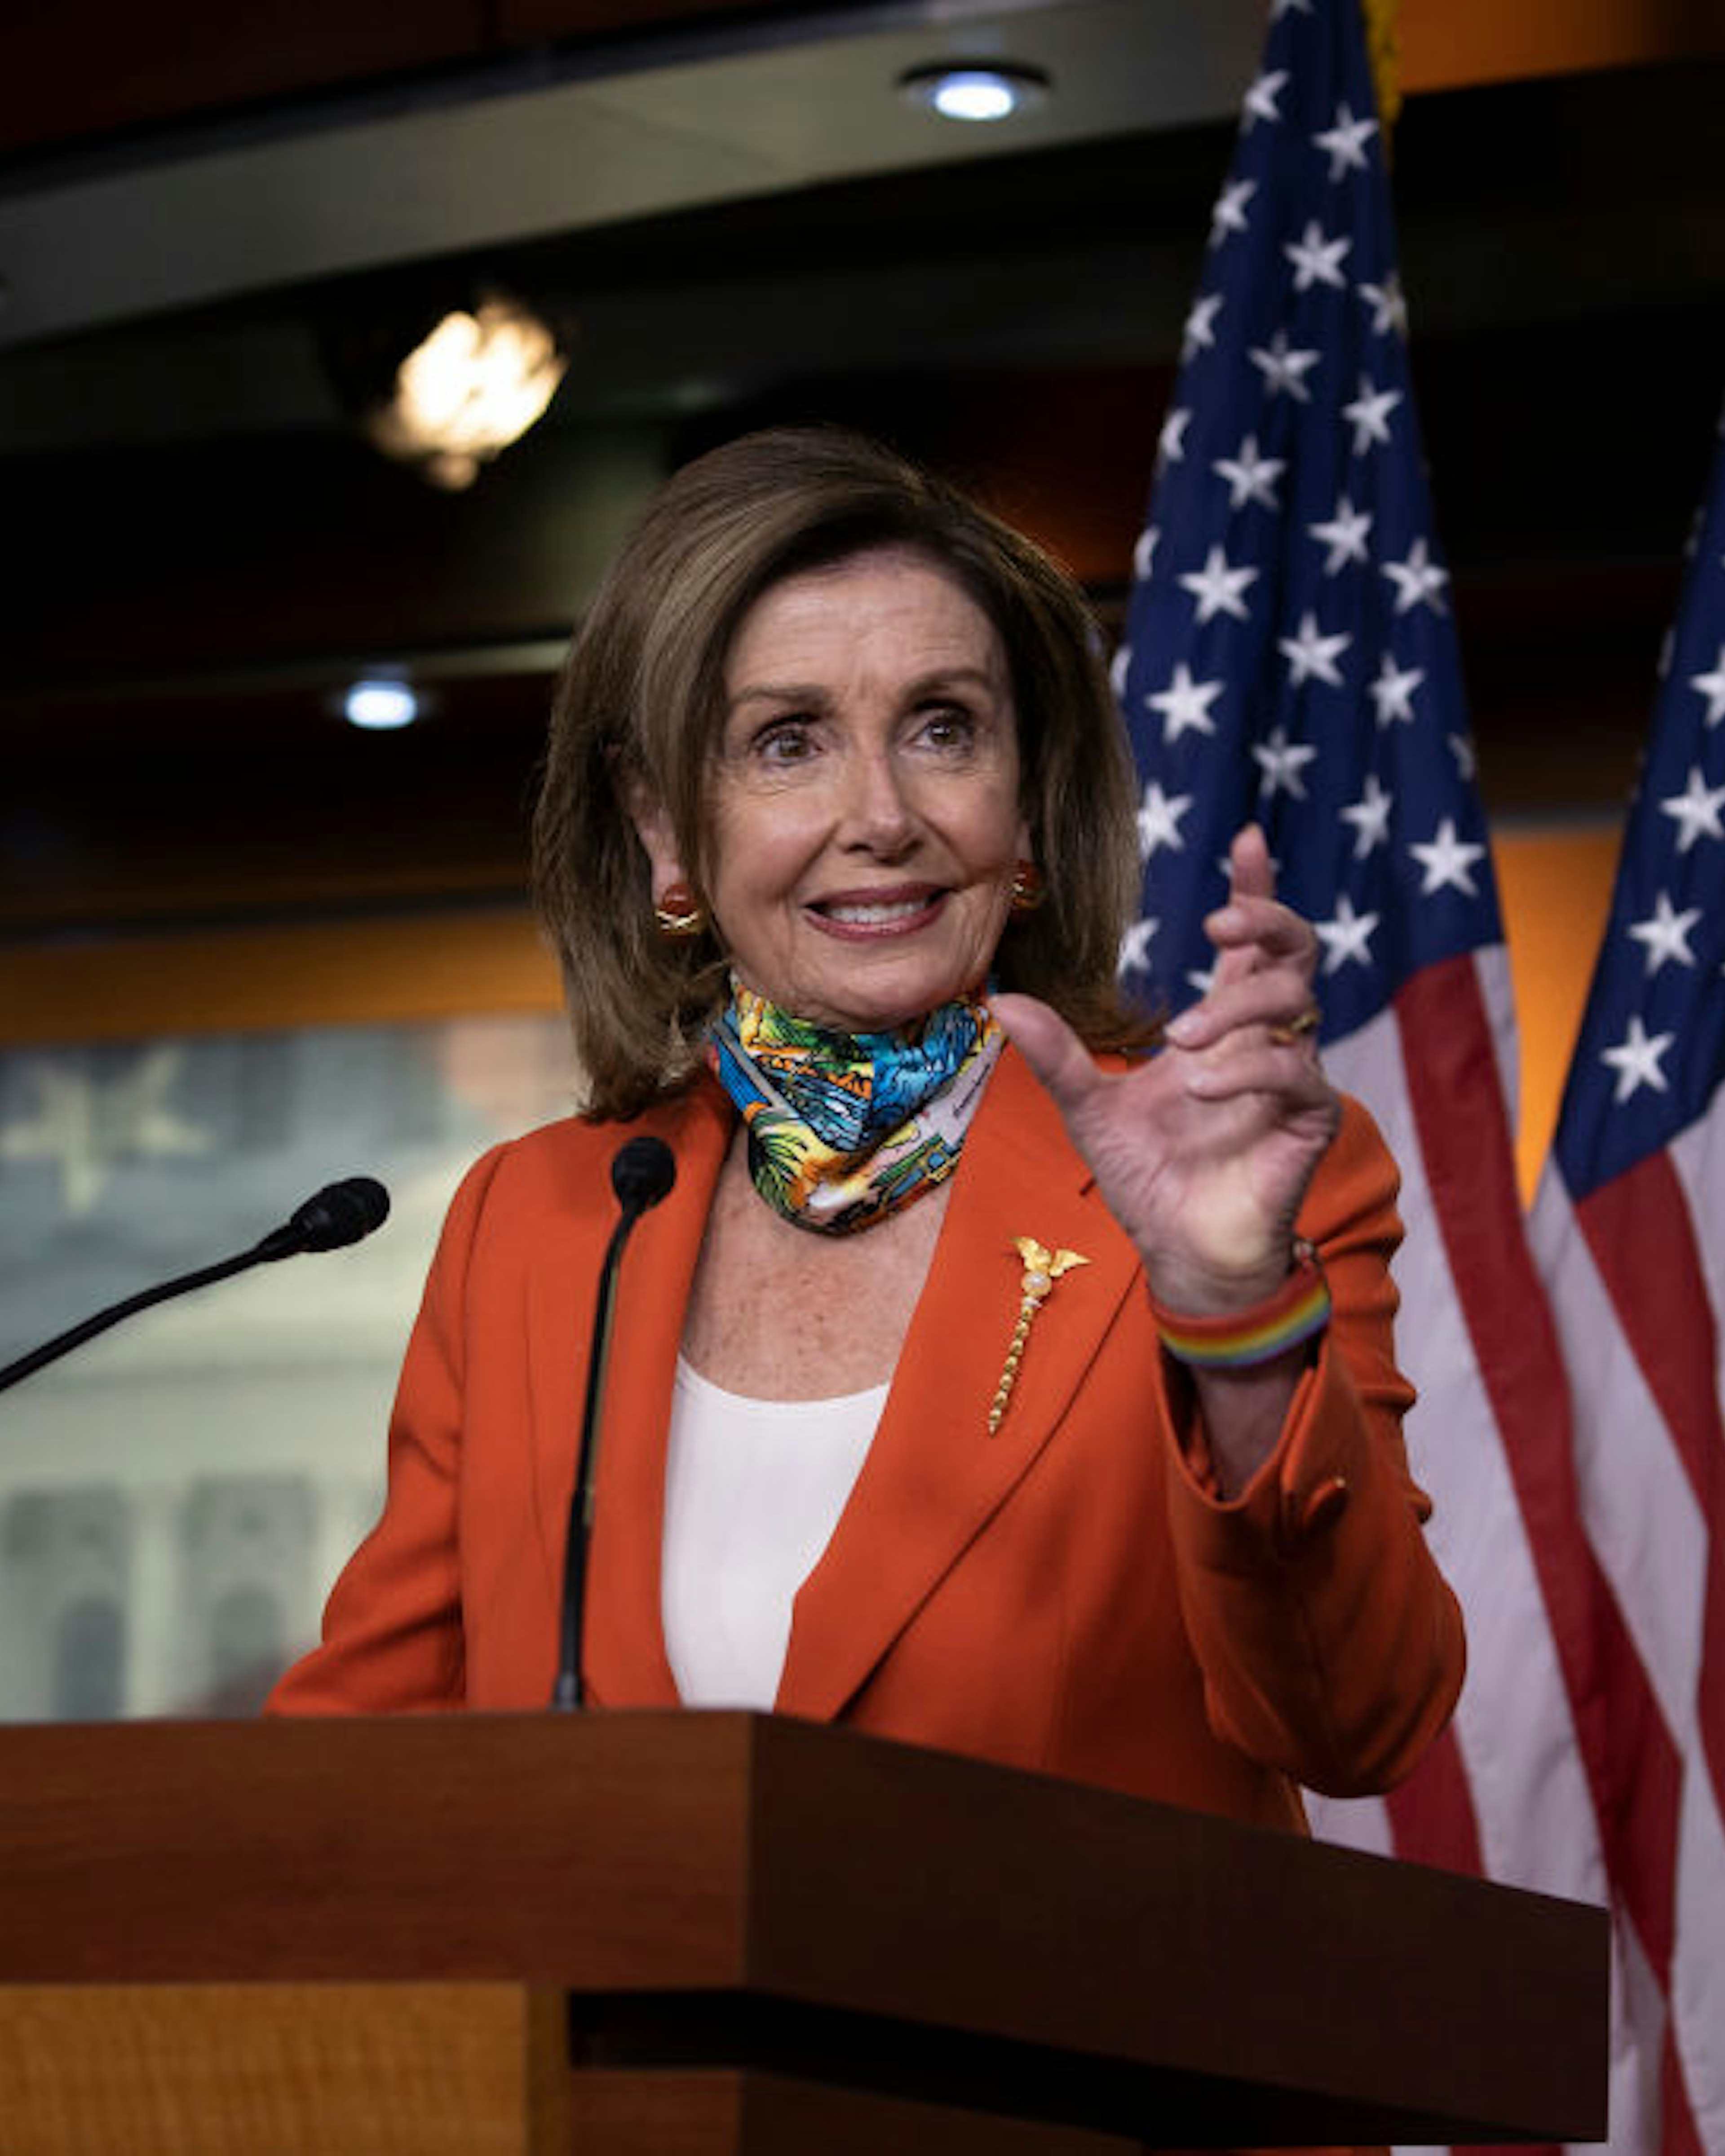 WASHINGTON, DC - JUNE 26: Speaker of the House Nancy Pelosi (D-CA) speaks at her weekly press conference on Capitol Hill on June 26, 2020 in Washington, DC. Pelosi spoke about the Police Bill and DC Statehood. (Photo by Tasos Katopodis/Getty Images)